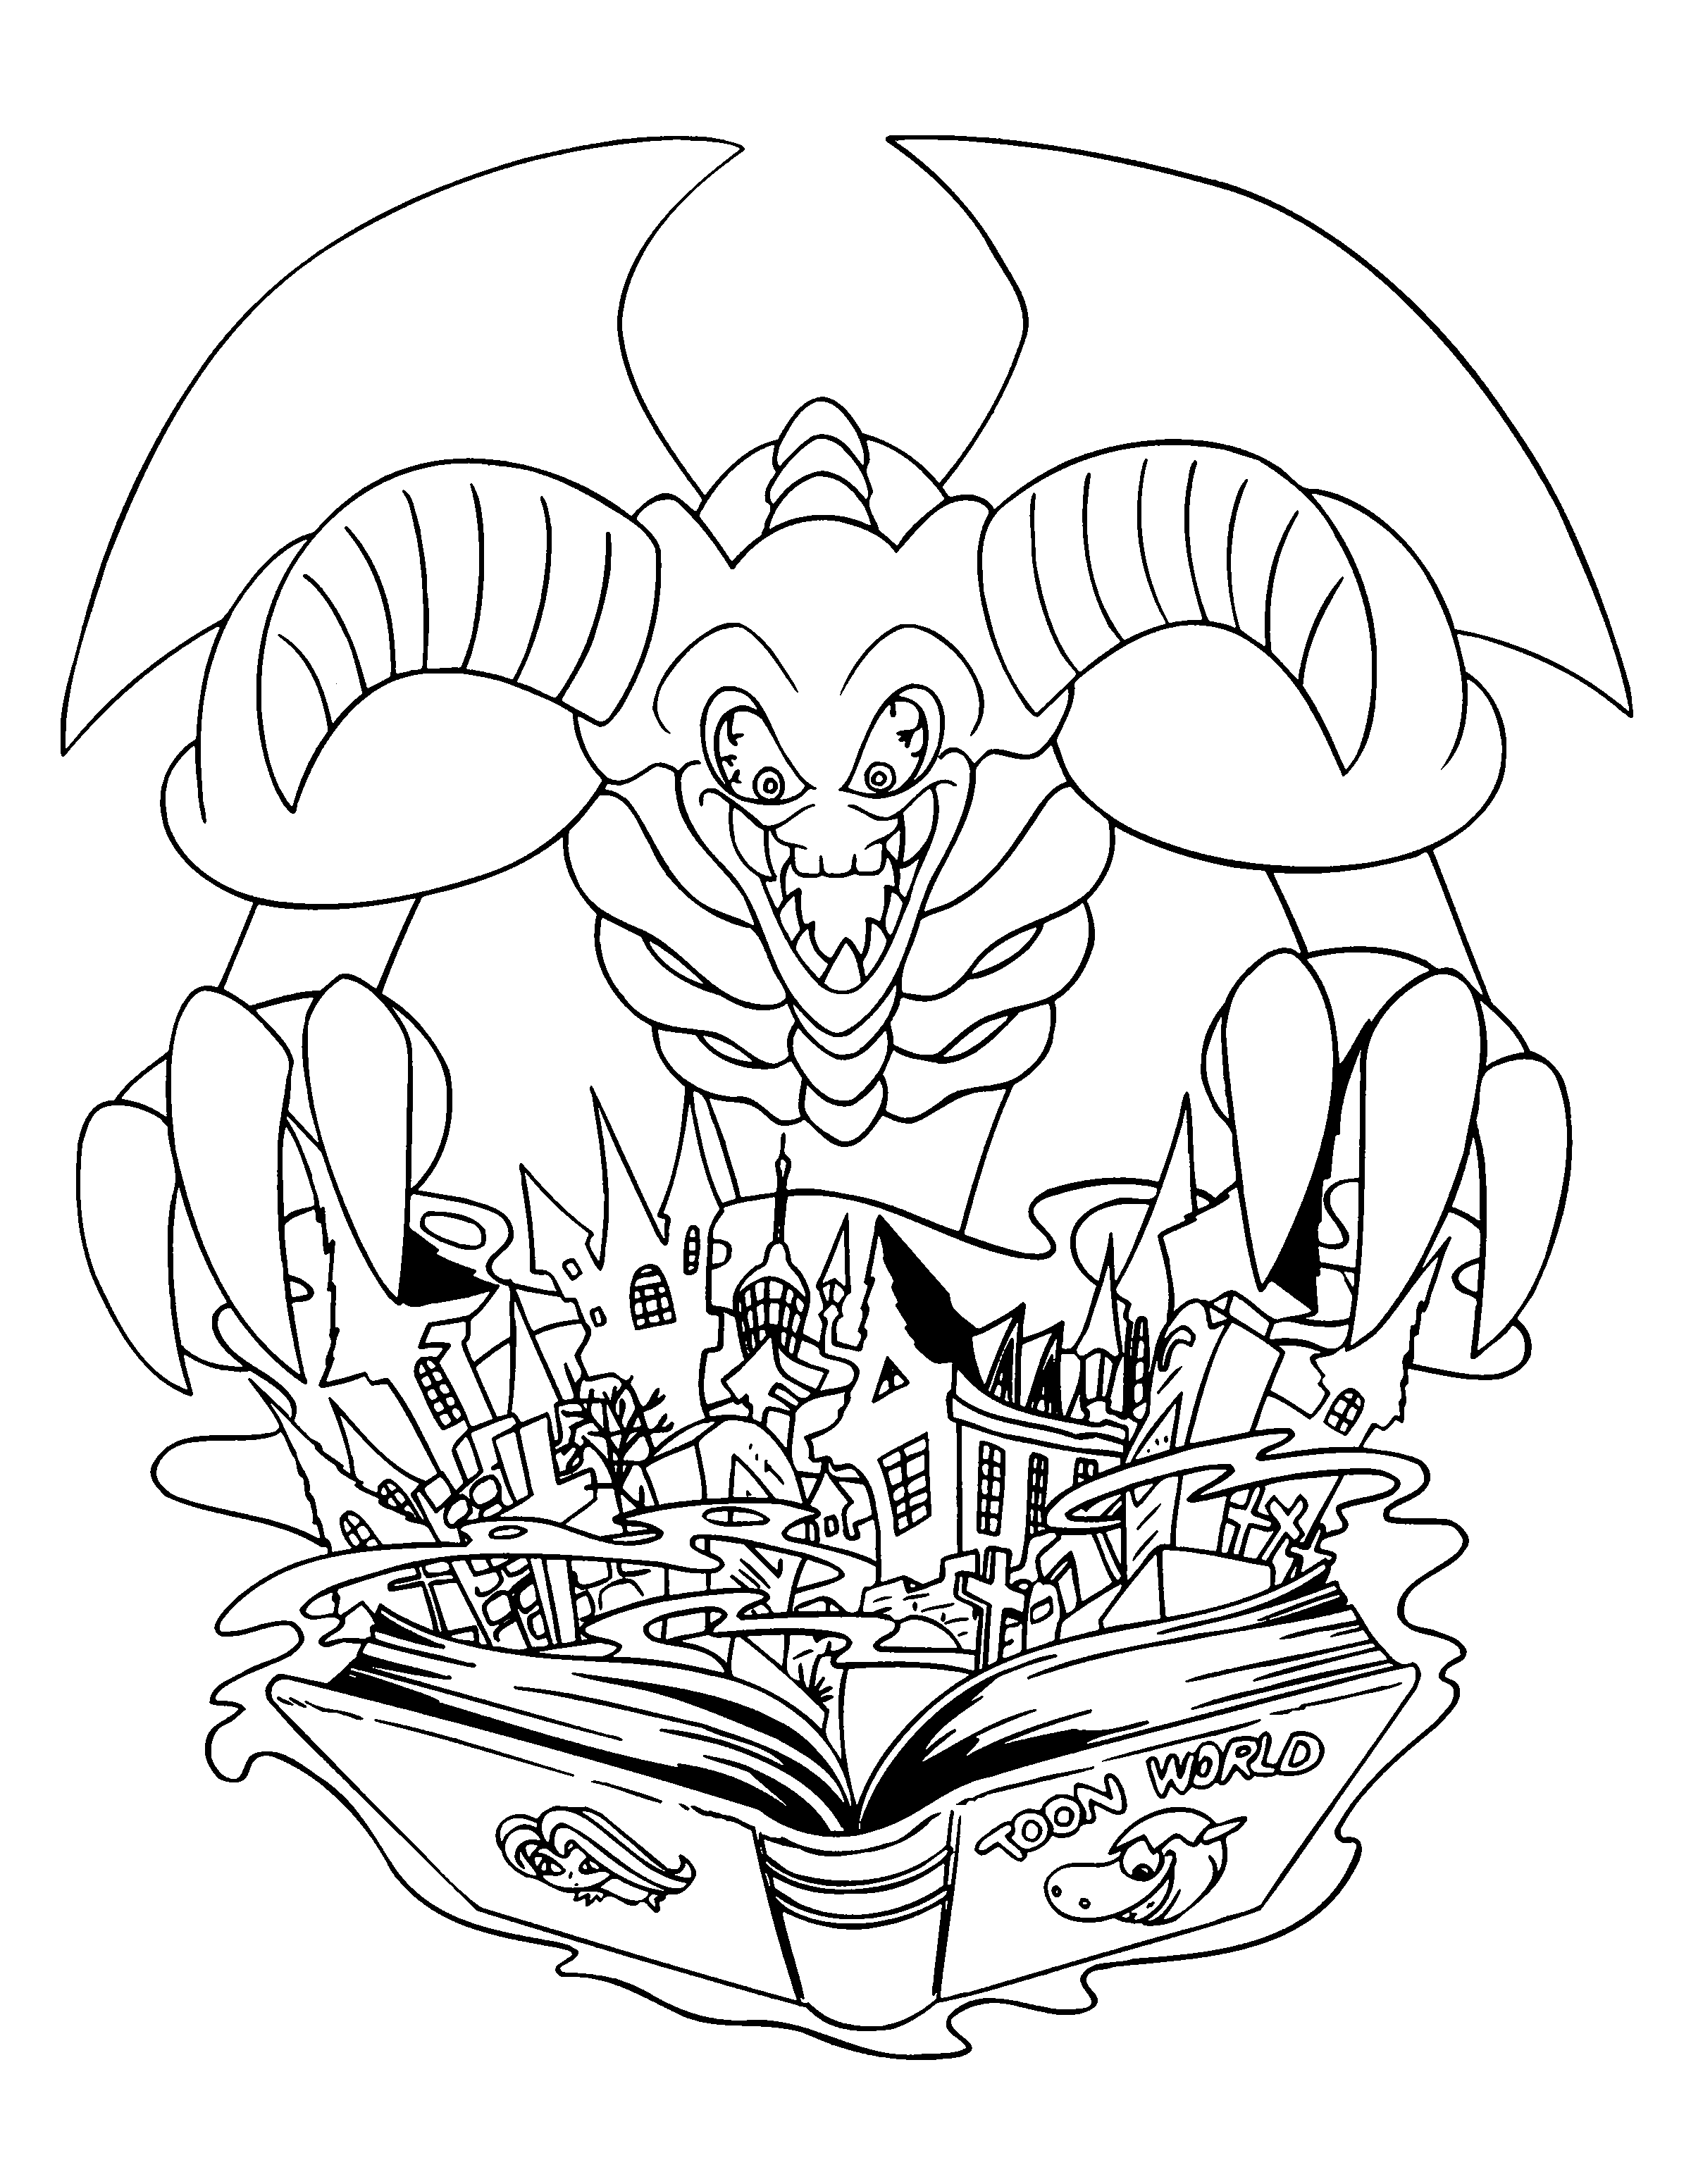 animated-coloring-pages-yu-gi-oh-image-0015